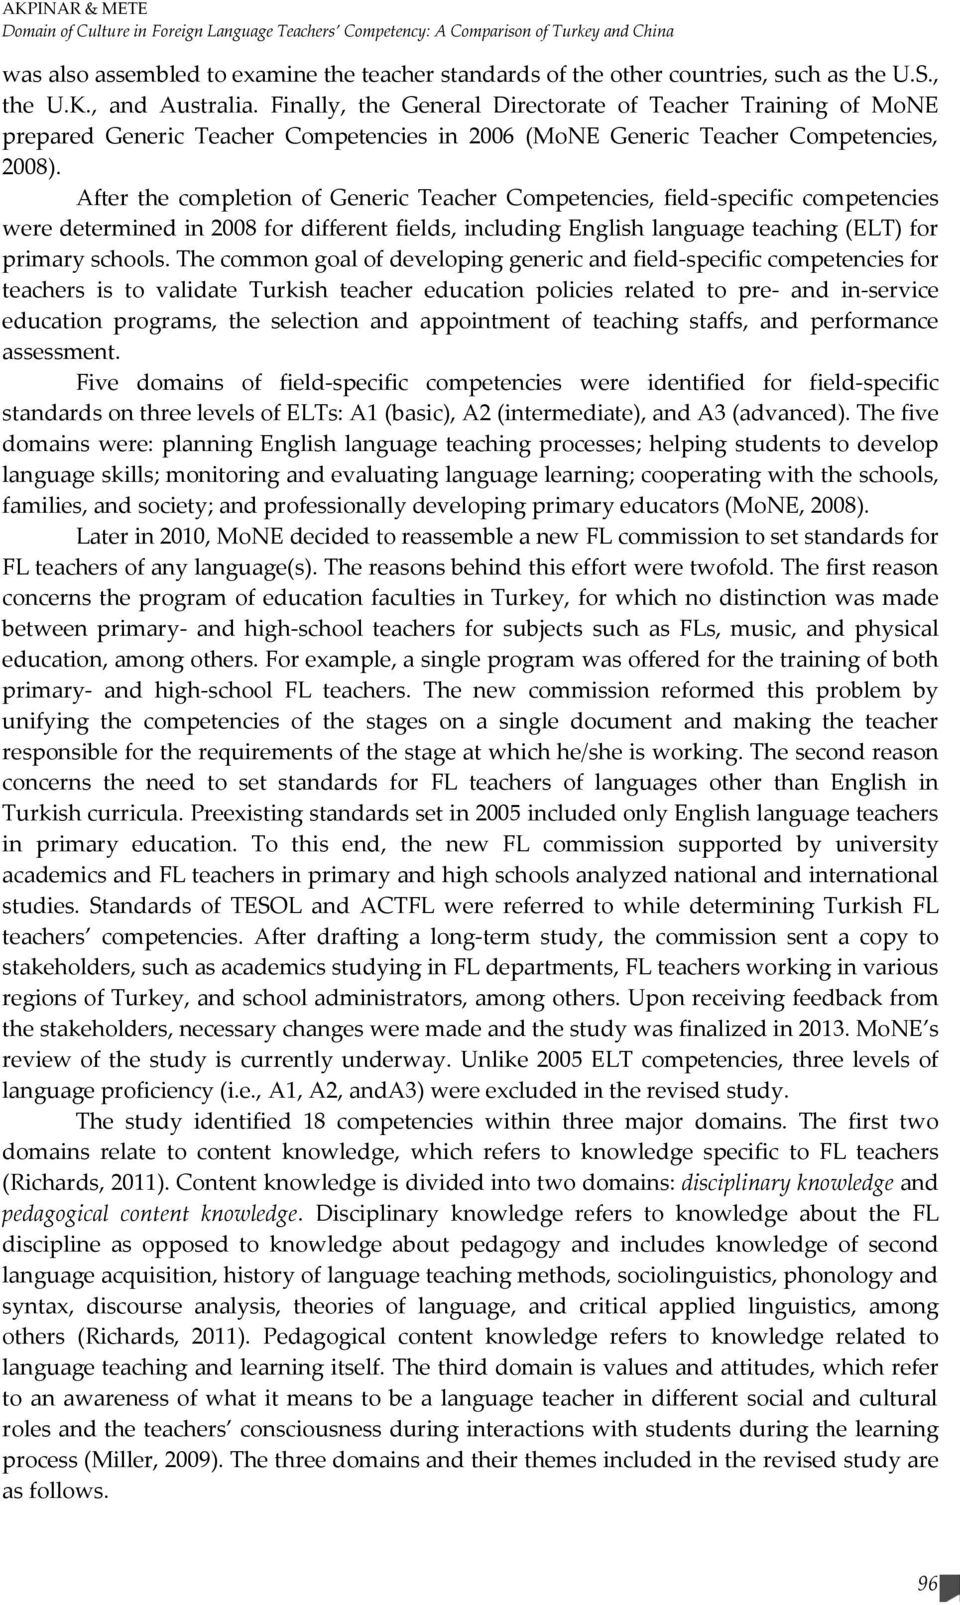 After the completion of Generic Teacher Competencies, field-specific competencies were determined in 2008 for different fields, including English language teaching (ELT) for primary schools.